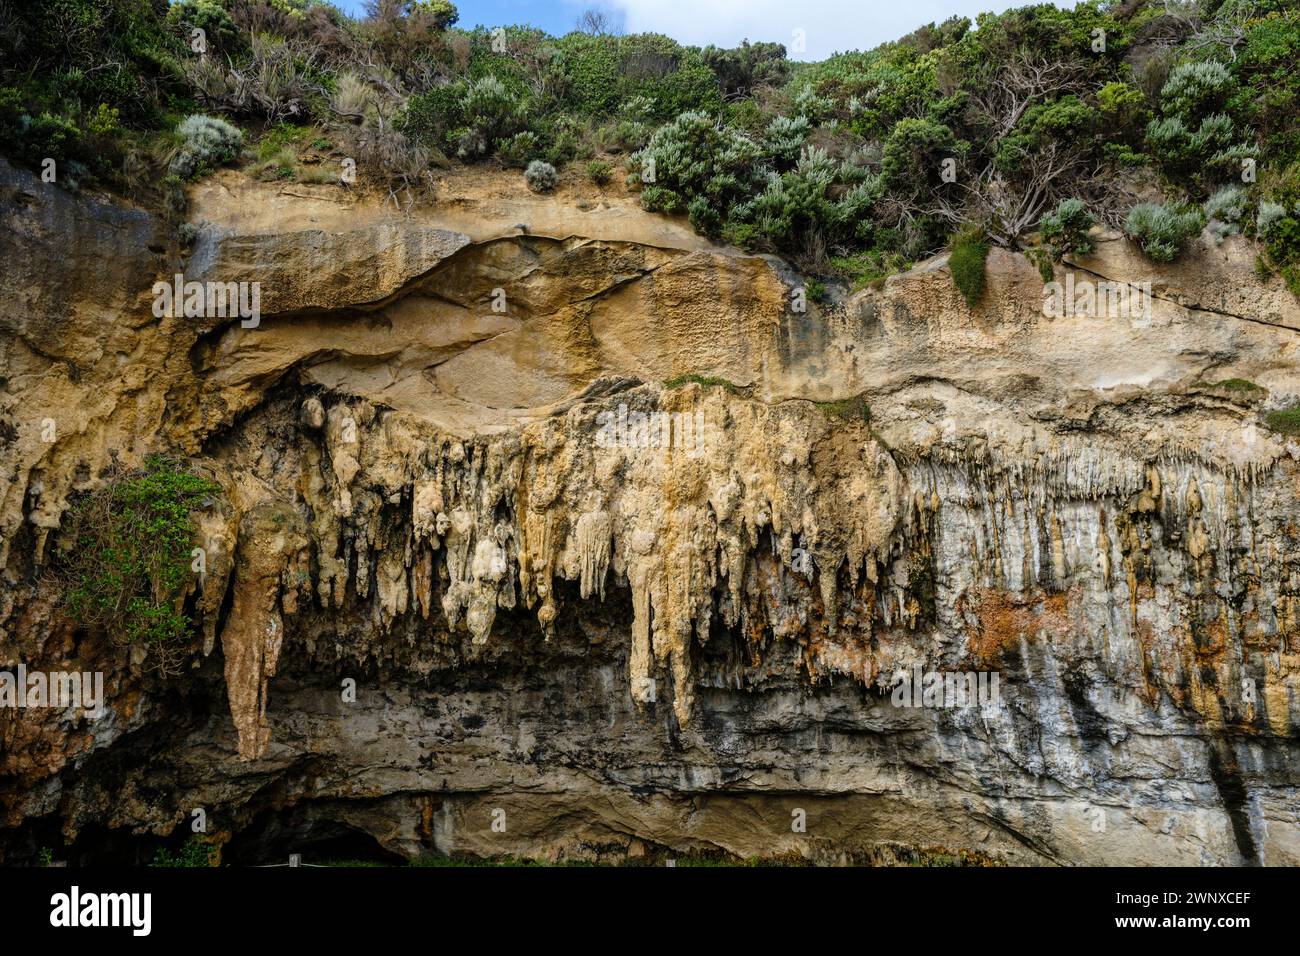 Stalactites in a cave at Loch Ard Gorge, Port Campbell National Park, Great Ocean Road, Victoria Australia Stock Photo